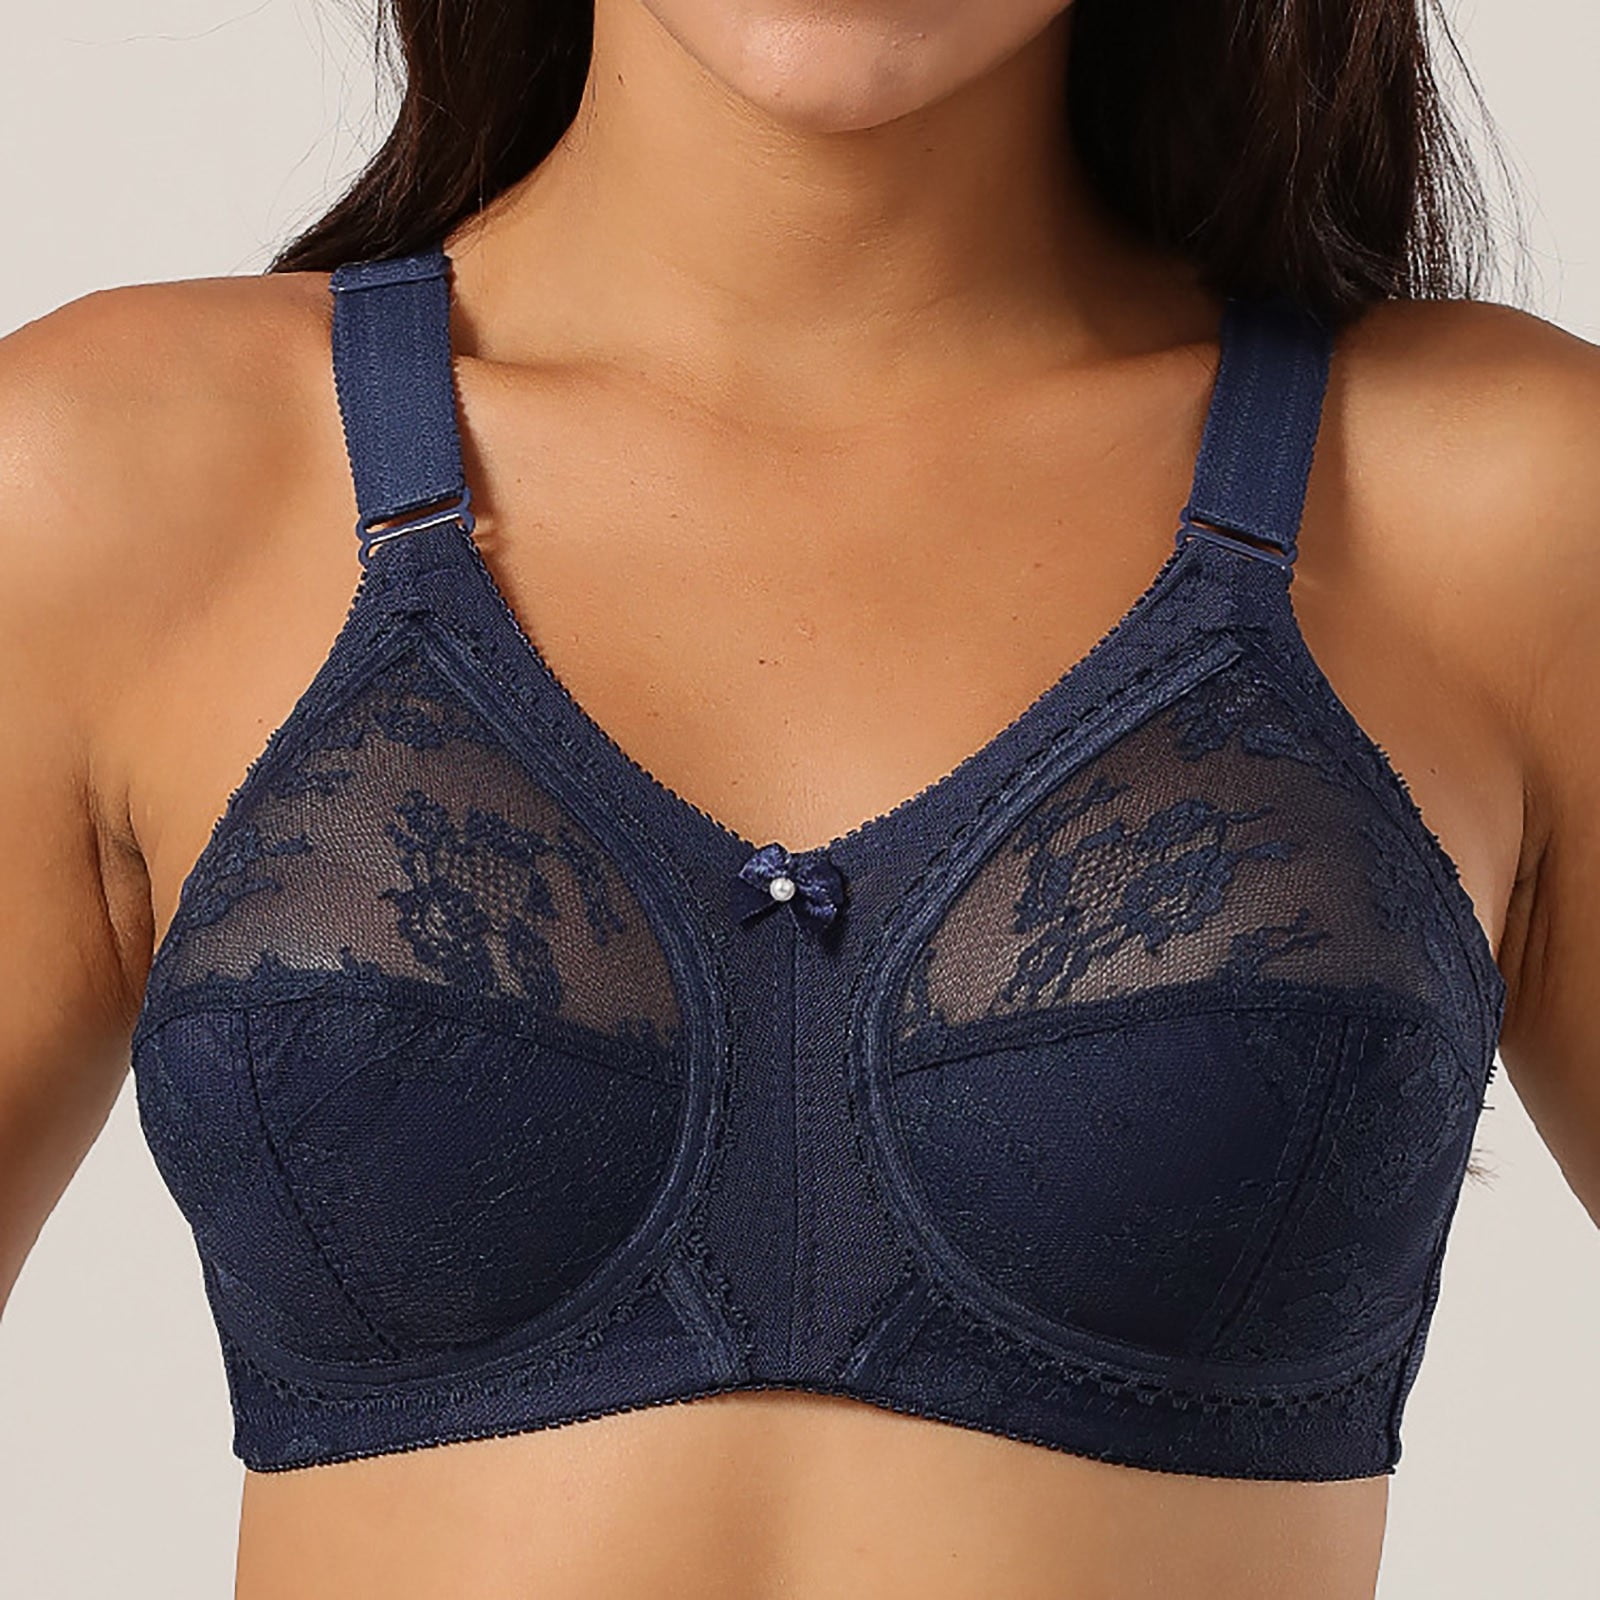 uublik Comfortable Bras for Women Lace Sexy Soft Wirefree Adjustable Bra  Blue 